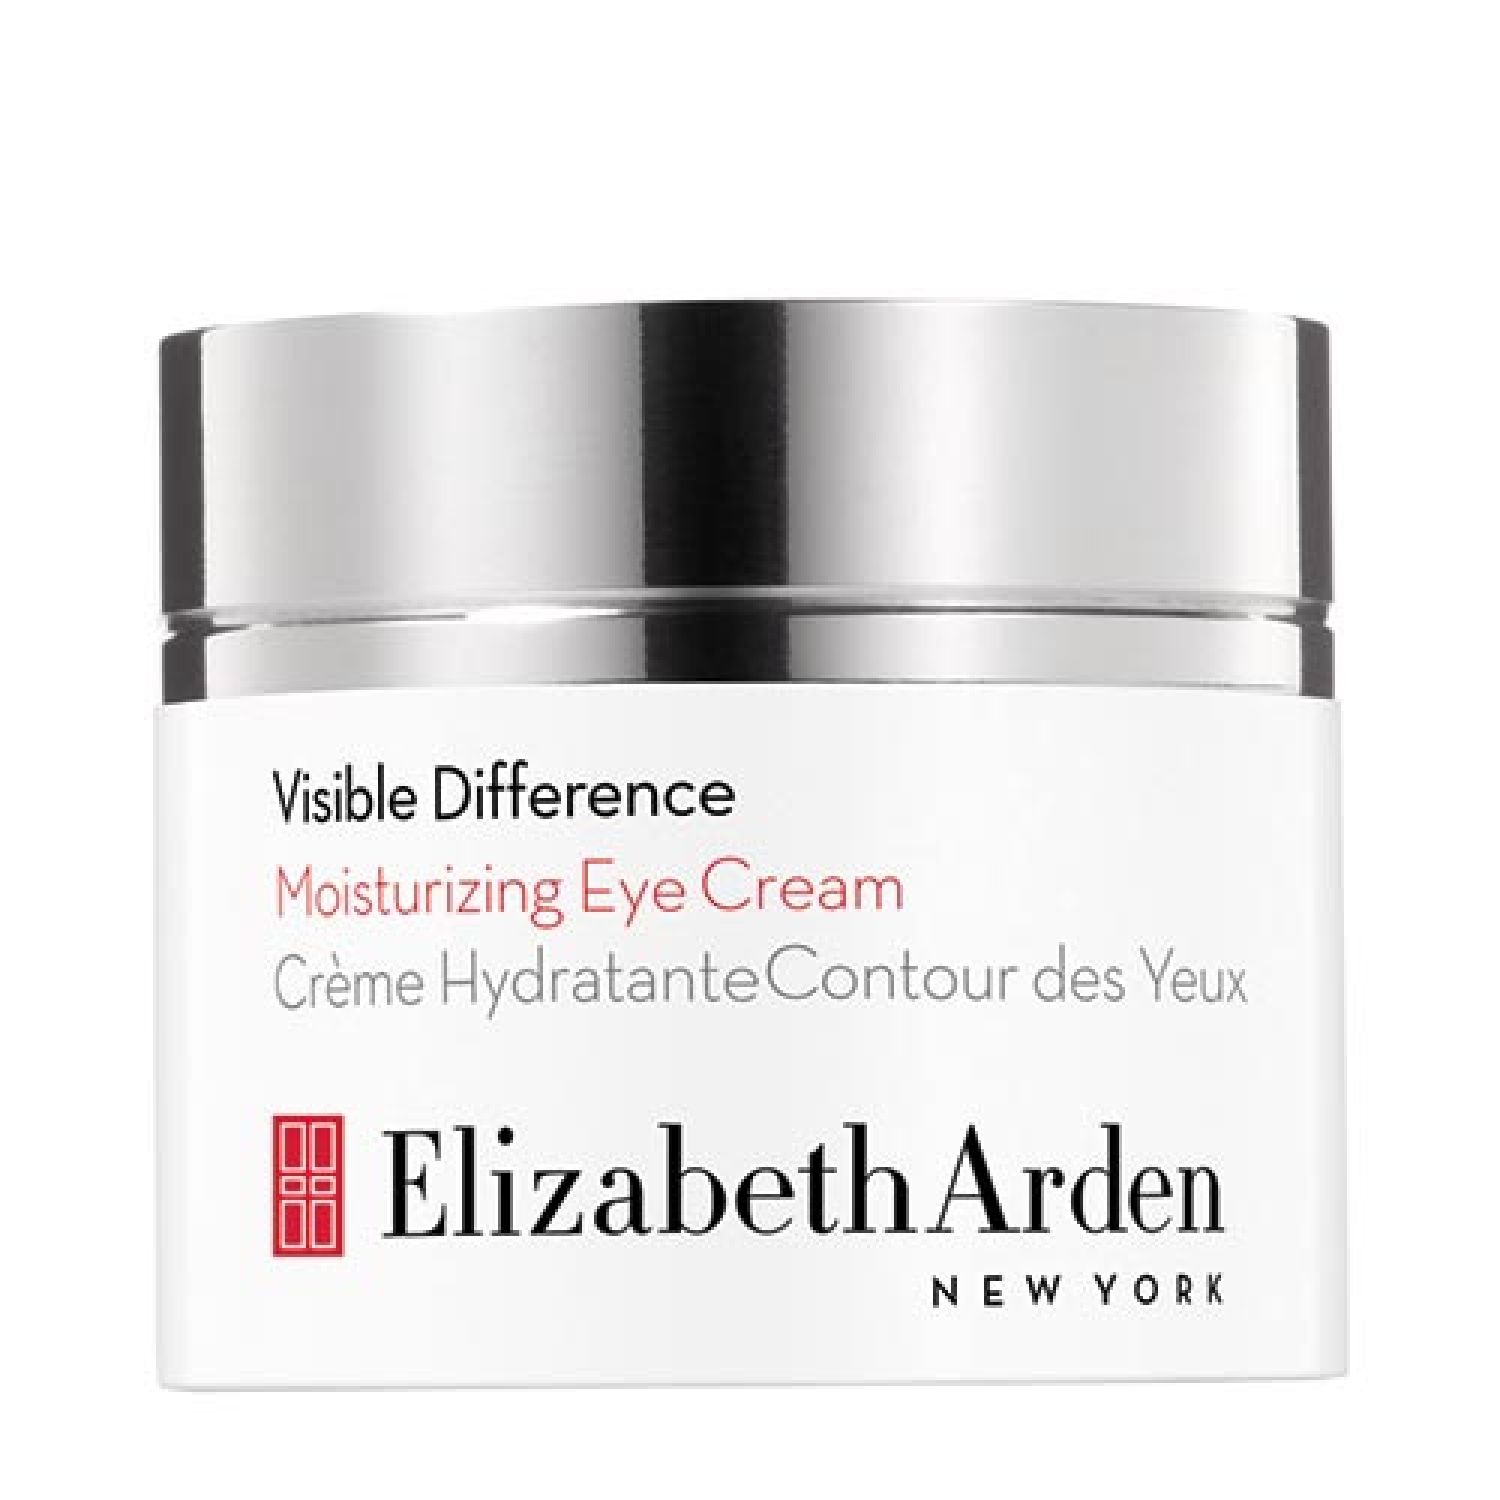 Elizabeth Arden Visible Difference Visible Difference Moisturizing Eye Cream